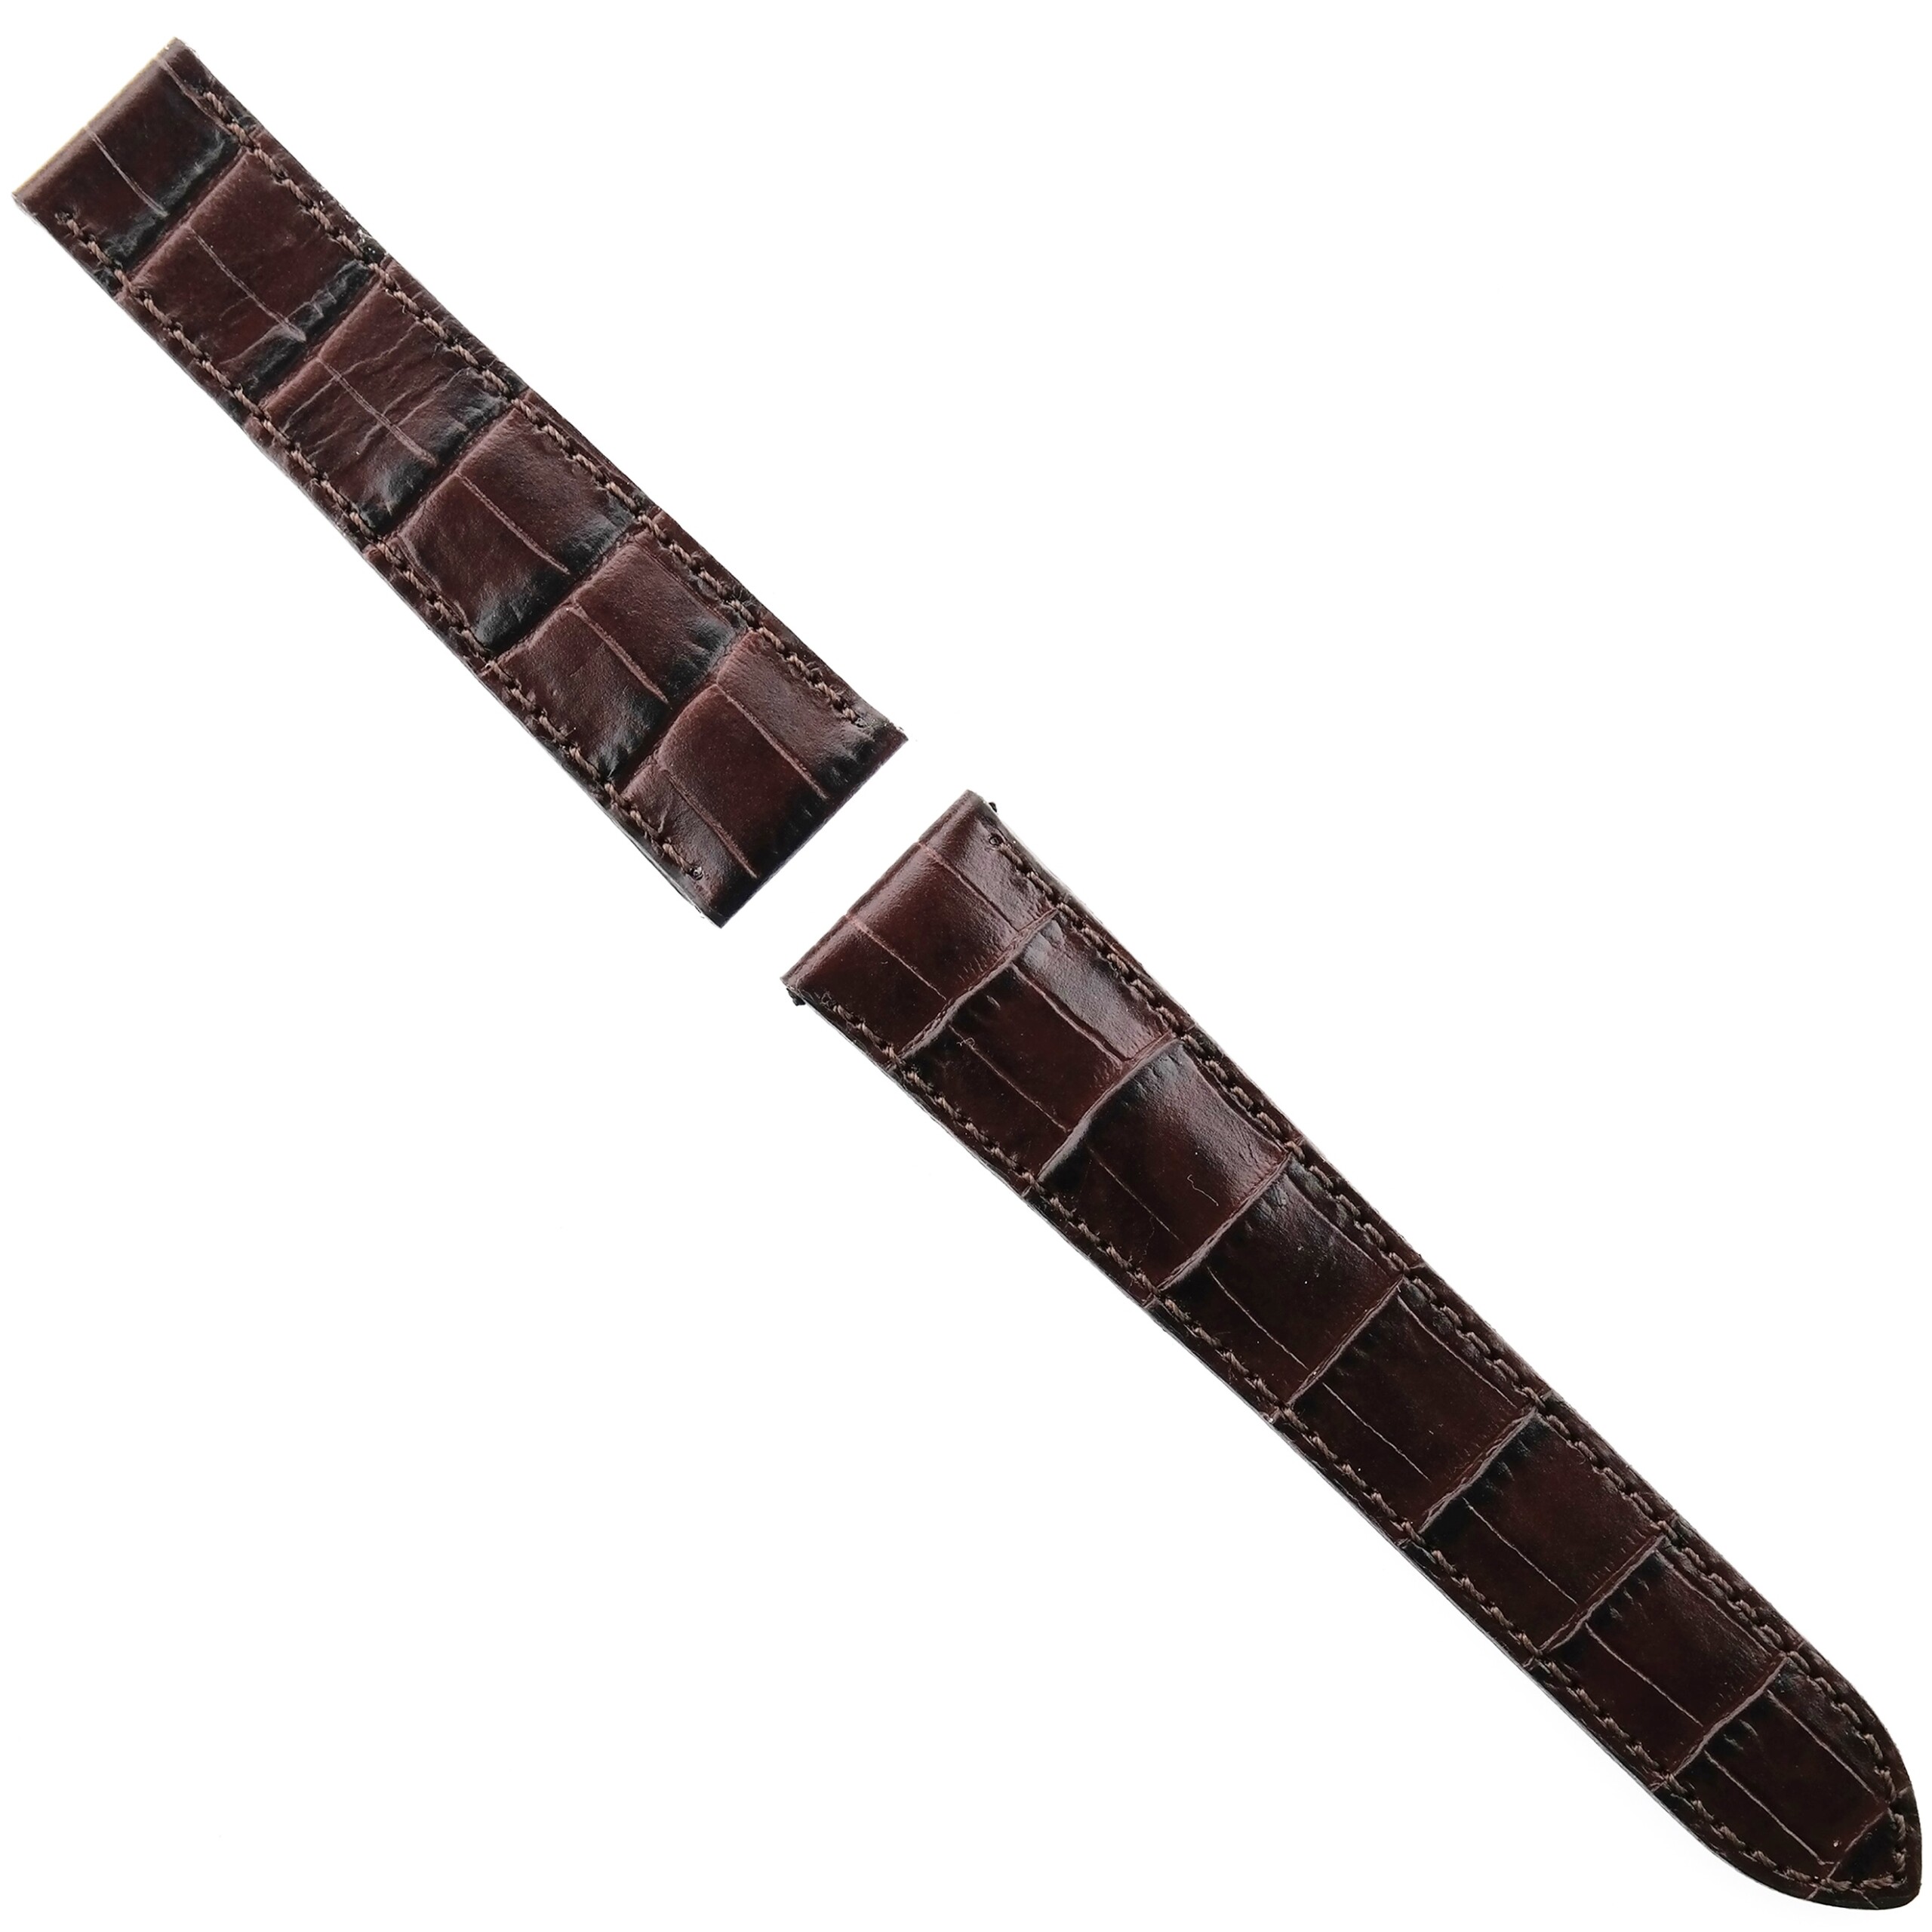 MAURICE LACROIX - Luxury Watch Strap - 21/18 80/115 - Swiss Made - Brown